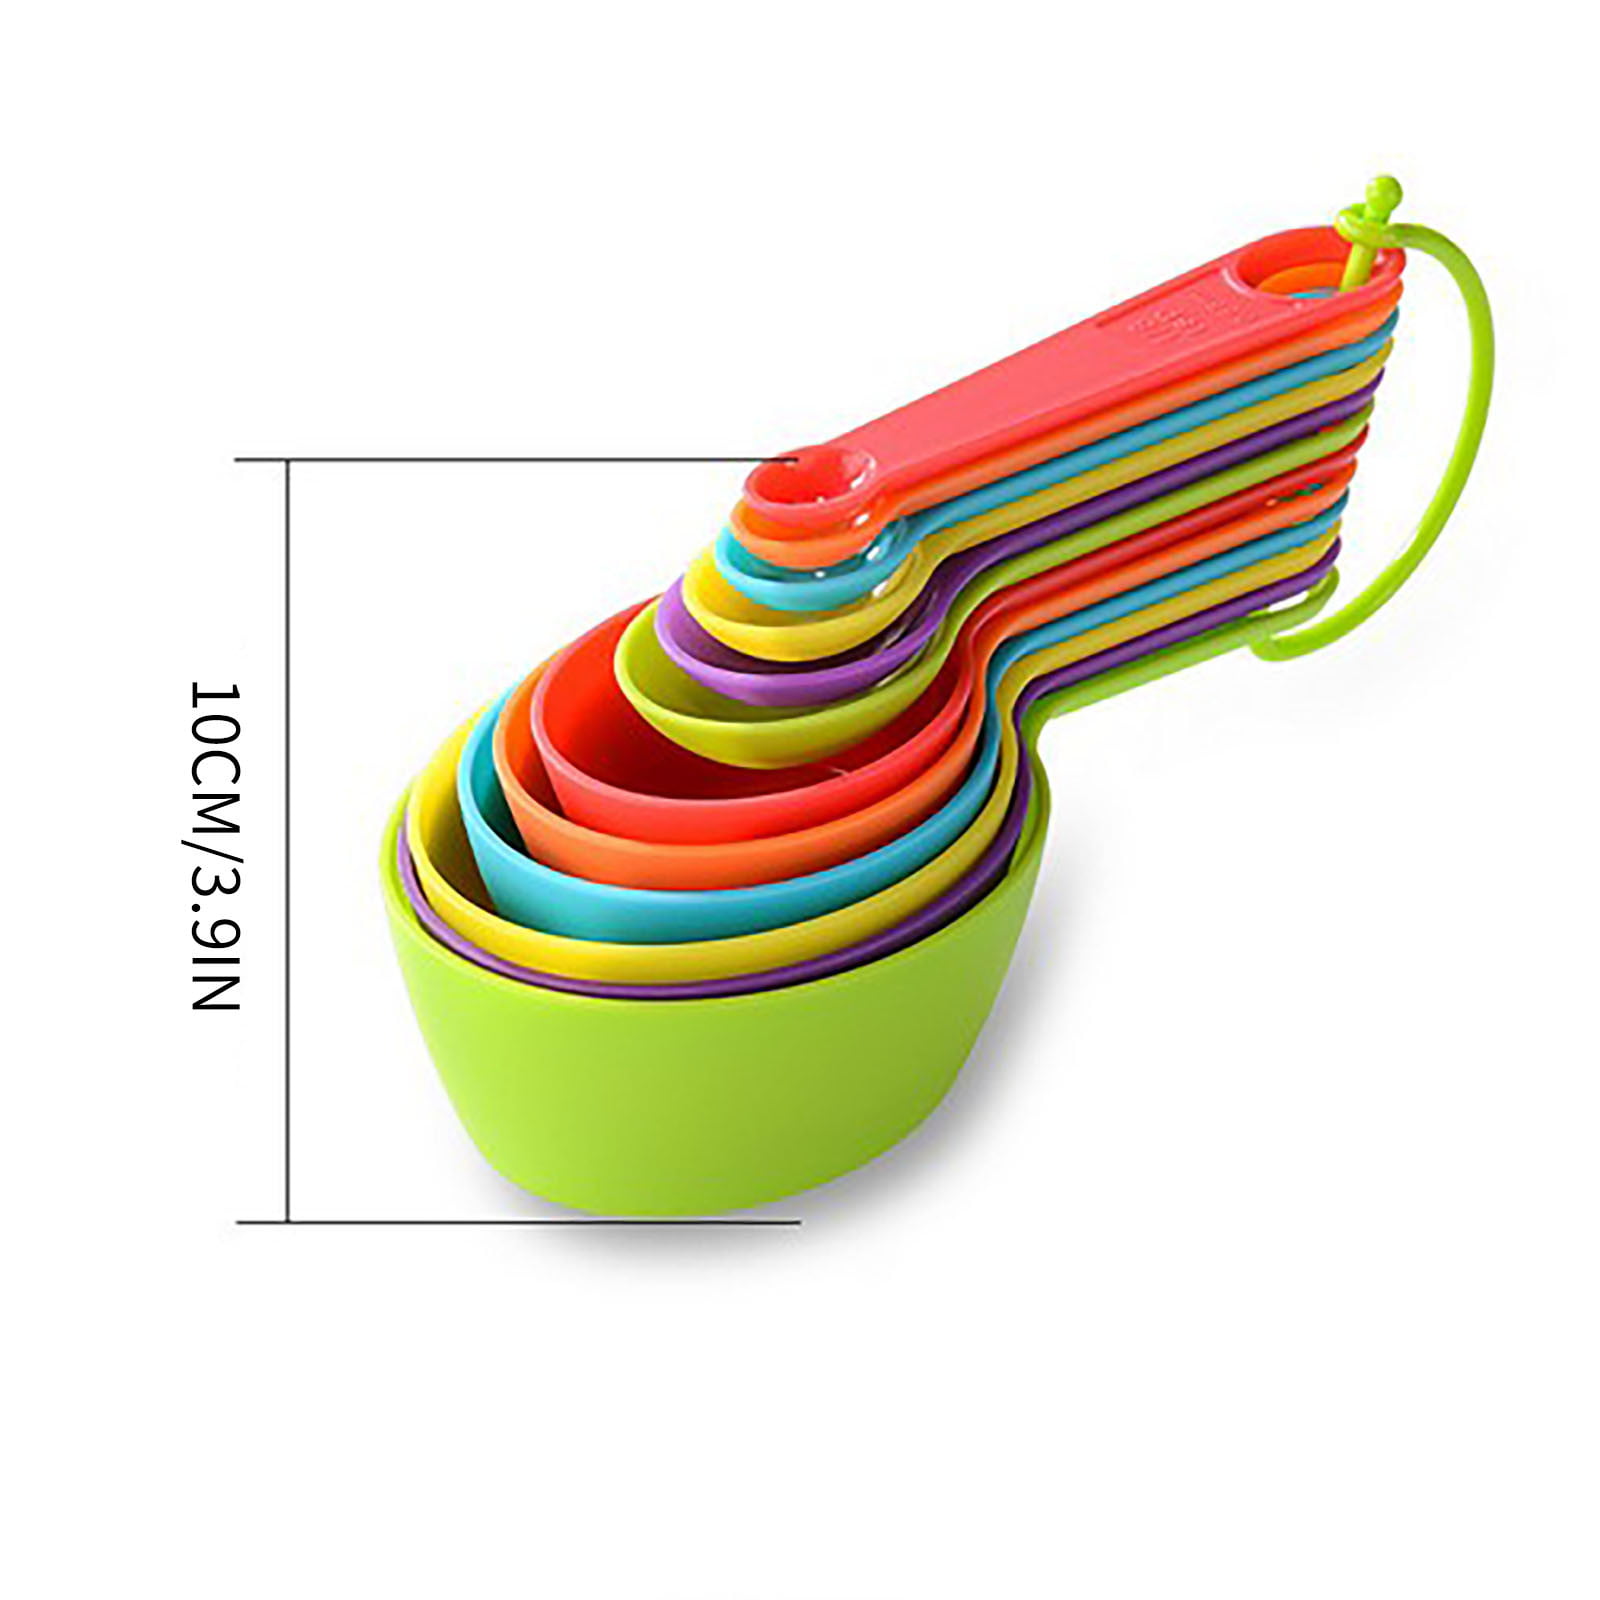 Measuring Cup Set Bright Colorful Kitchen Essentials 